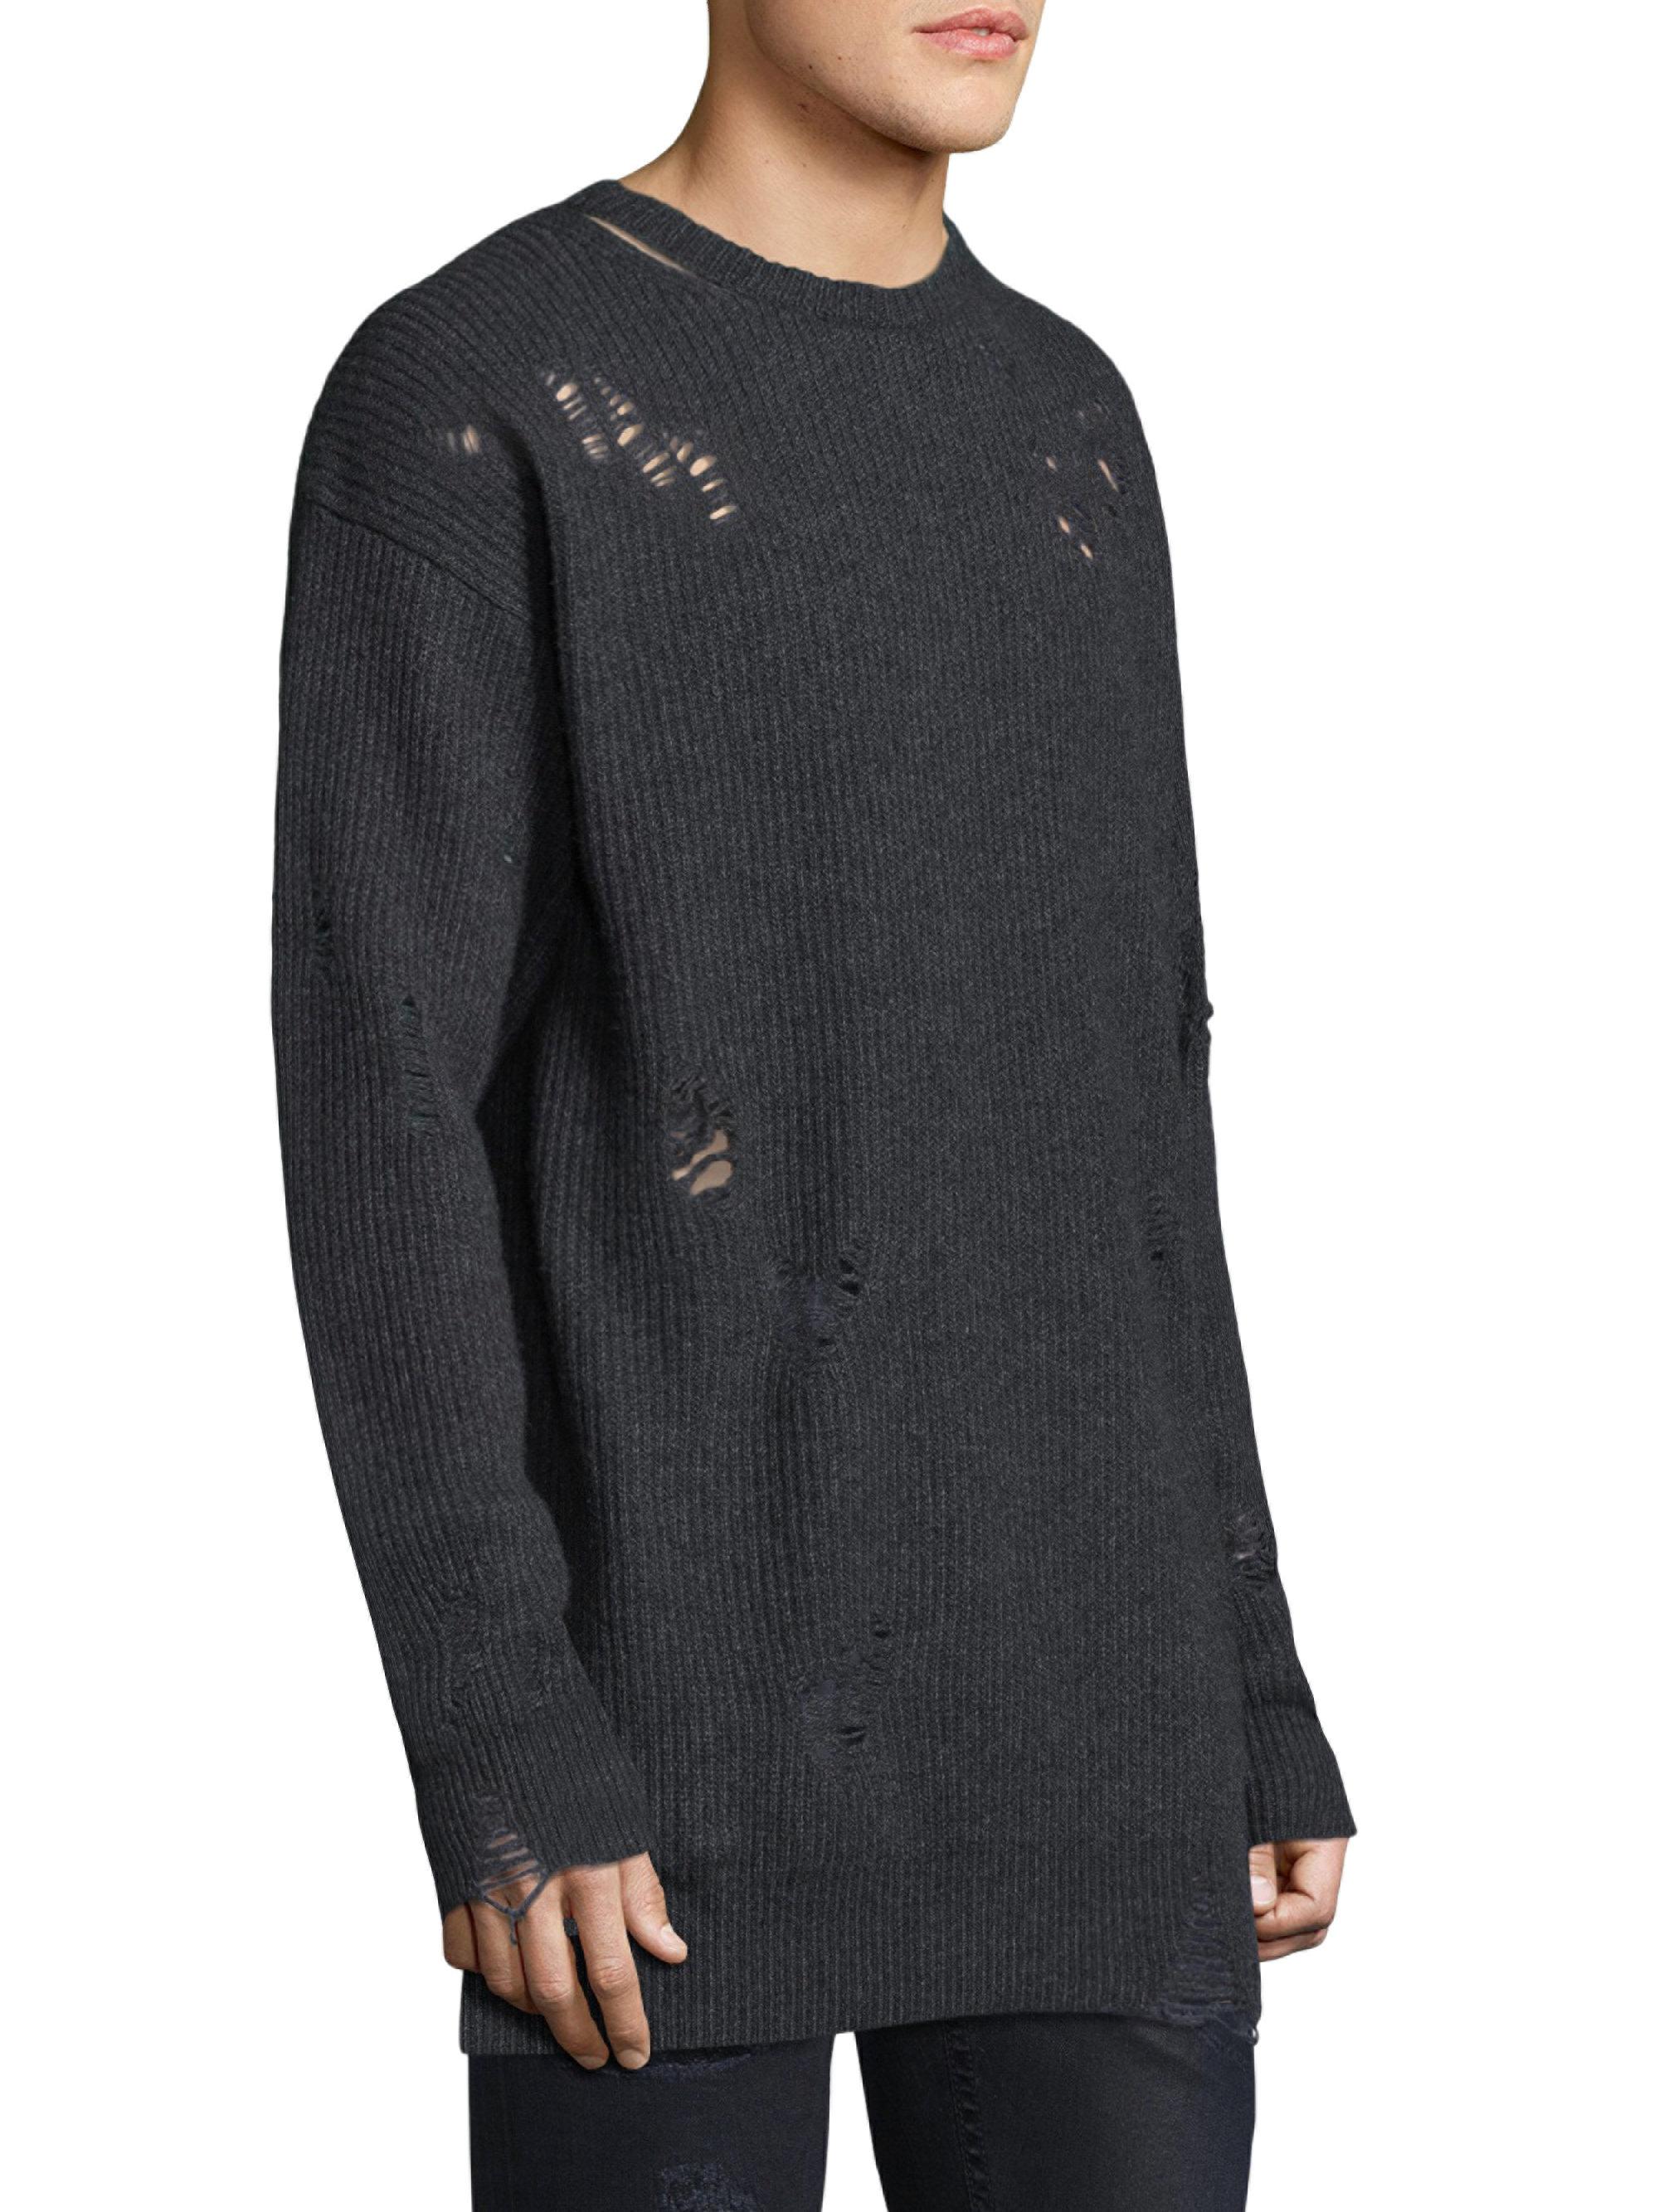 DIESEL Wool Ripped Knitted Sweater in Black for Men - Lyst